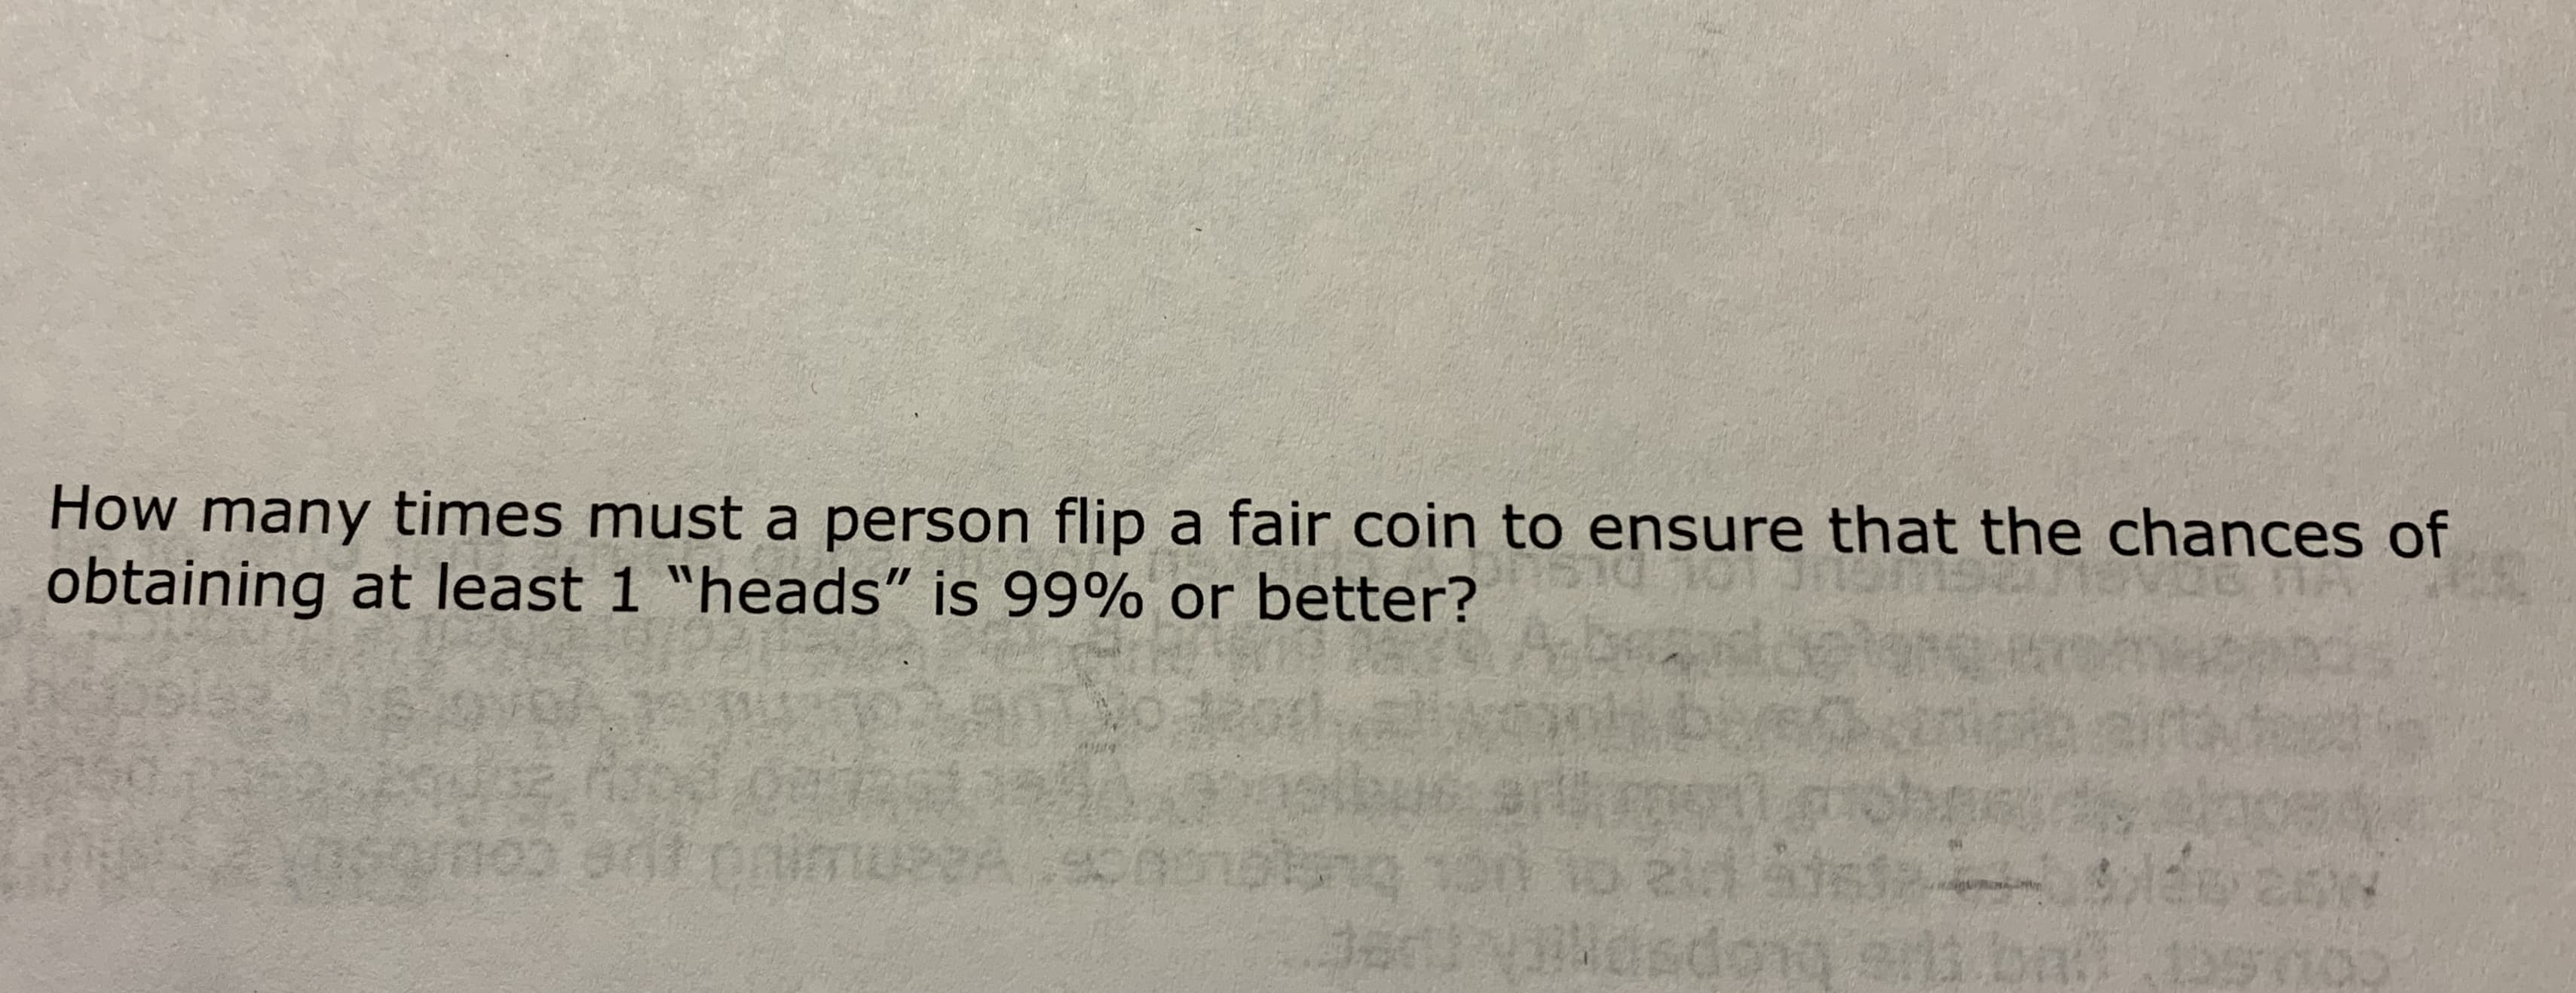 How many times must a person flip a fair coin to ensure that the chances of
obtaining at least 1 "heads" is 99% or better?
imuseA sonots
sdops
